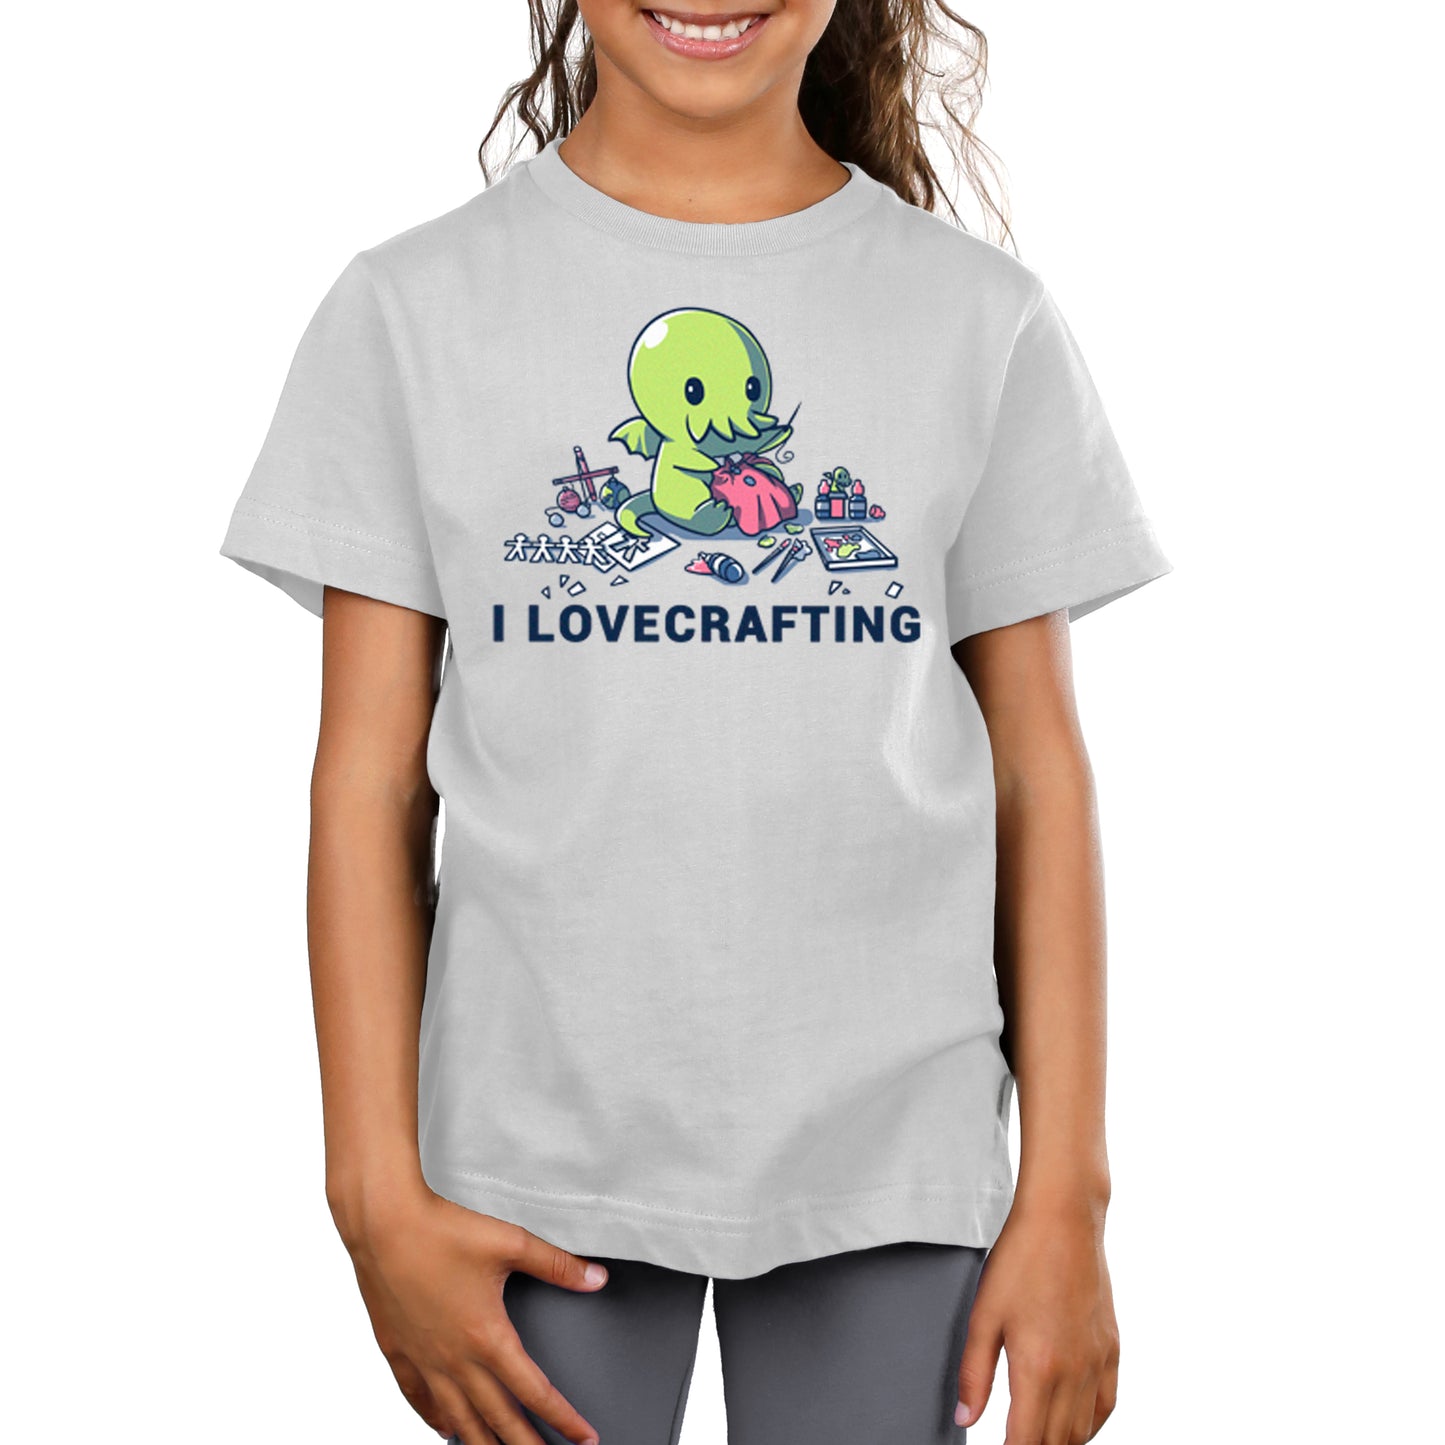 A girl wearing a TeeTurtle t-shirt that says "I Lovecrafting".